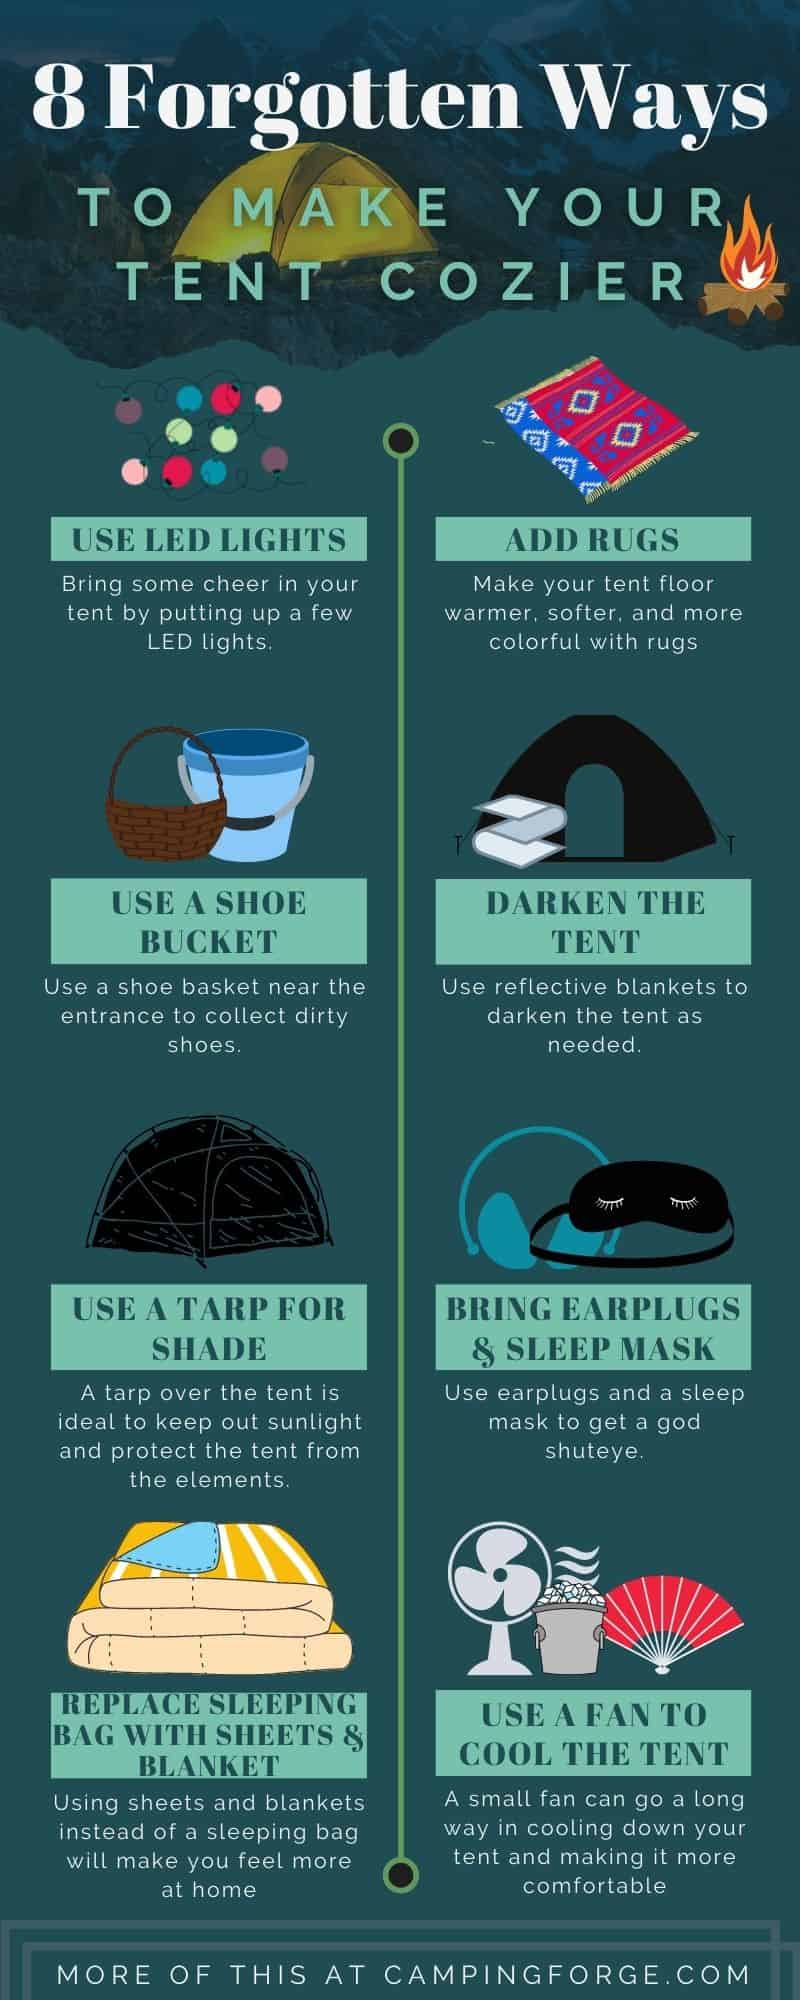 An infographic on how to make your tent cozy